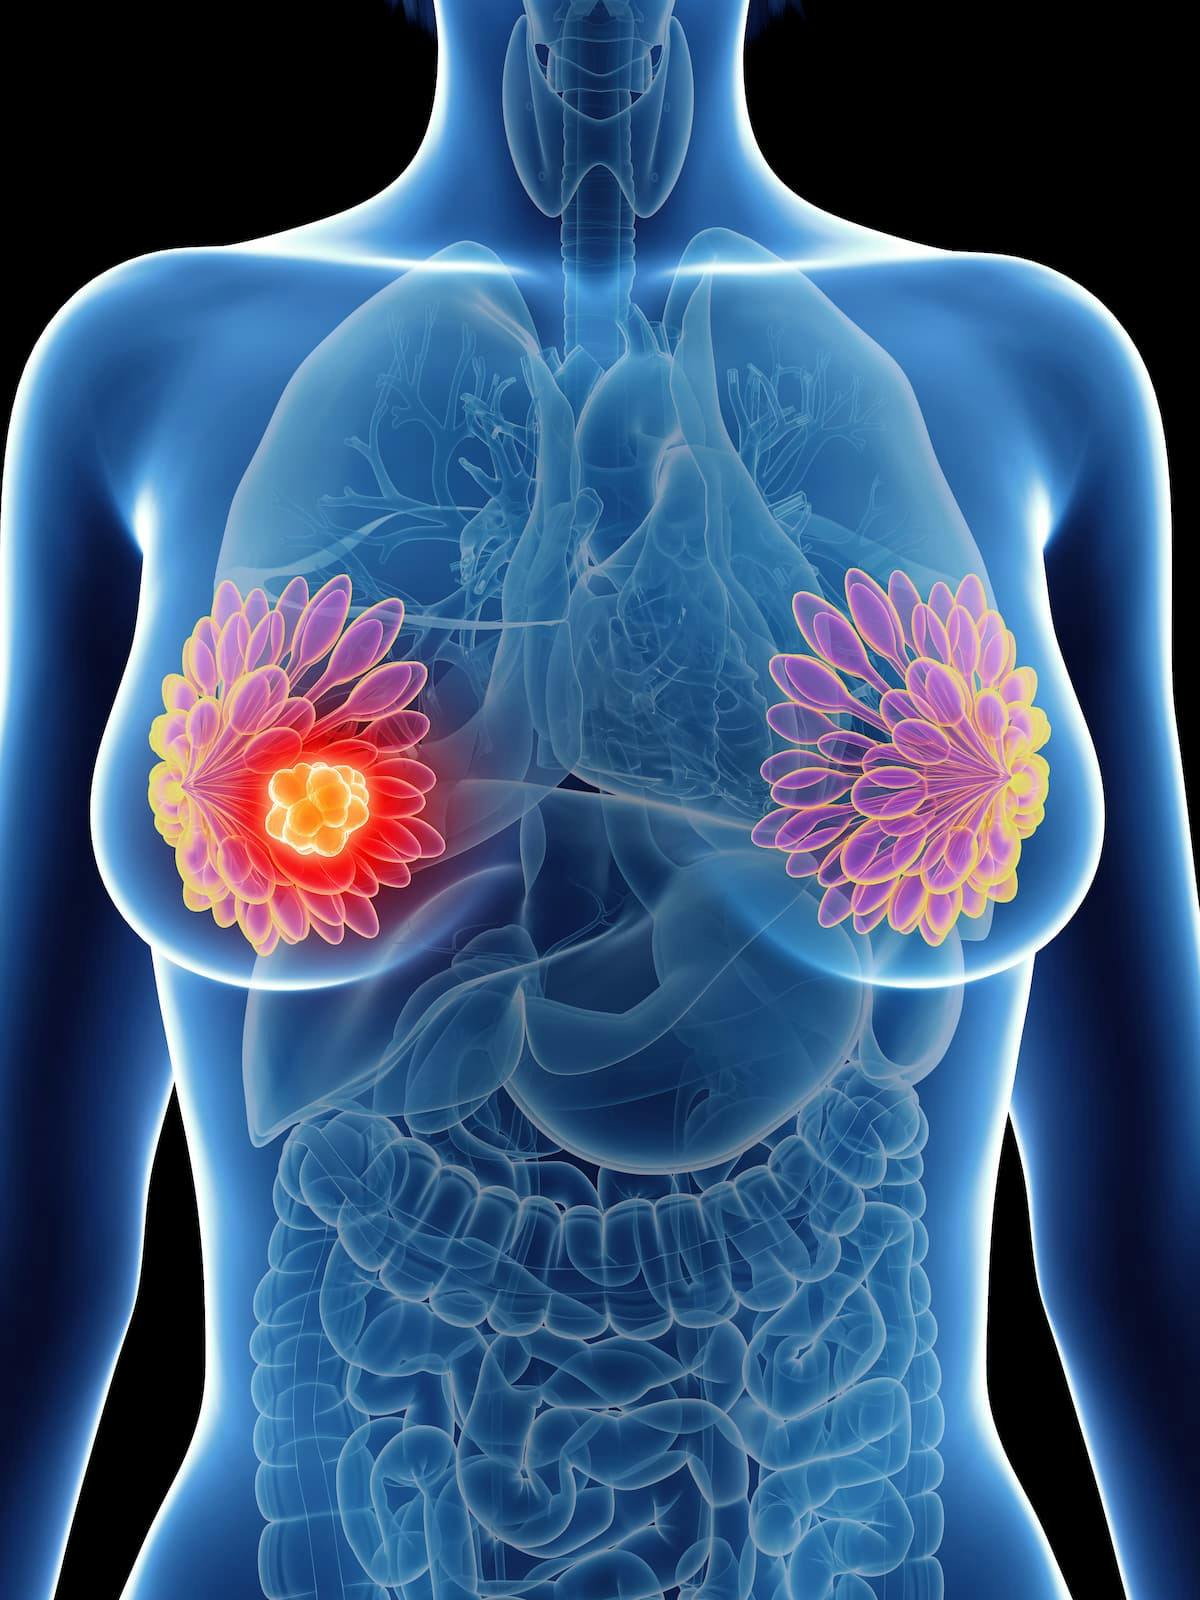 Findings from a phase 2 clinical study indicated that neoadjuvant pegylated liposomal doxorubicin plus cyclophosphamide, trastuzumab, and pertuzumab demonstrated promising efficacy and safety in the treatment of HER2-positive breast cancer. 